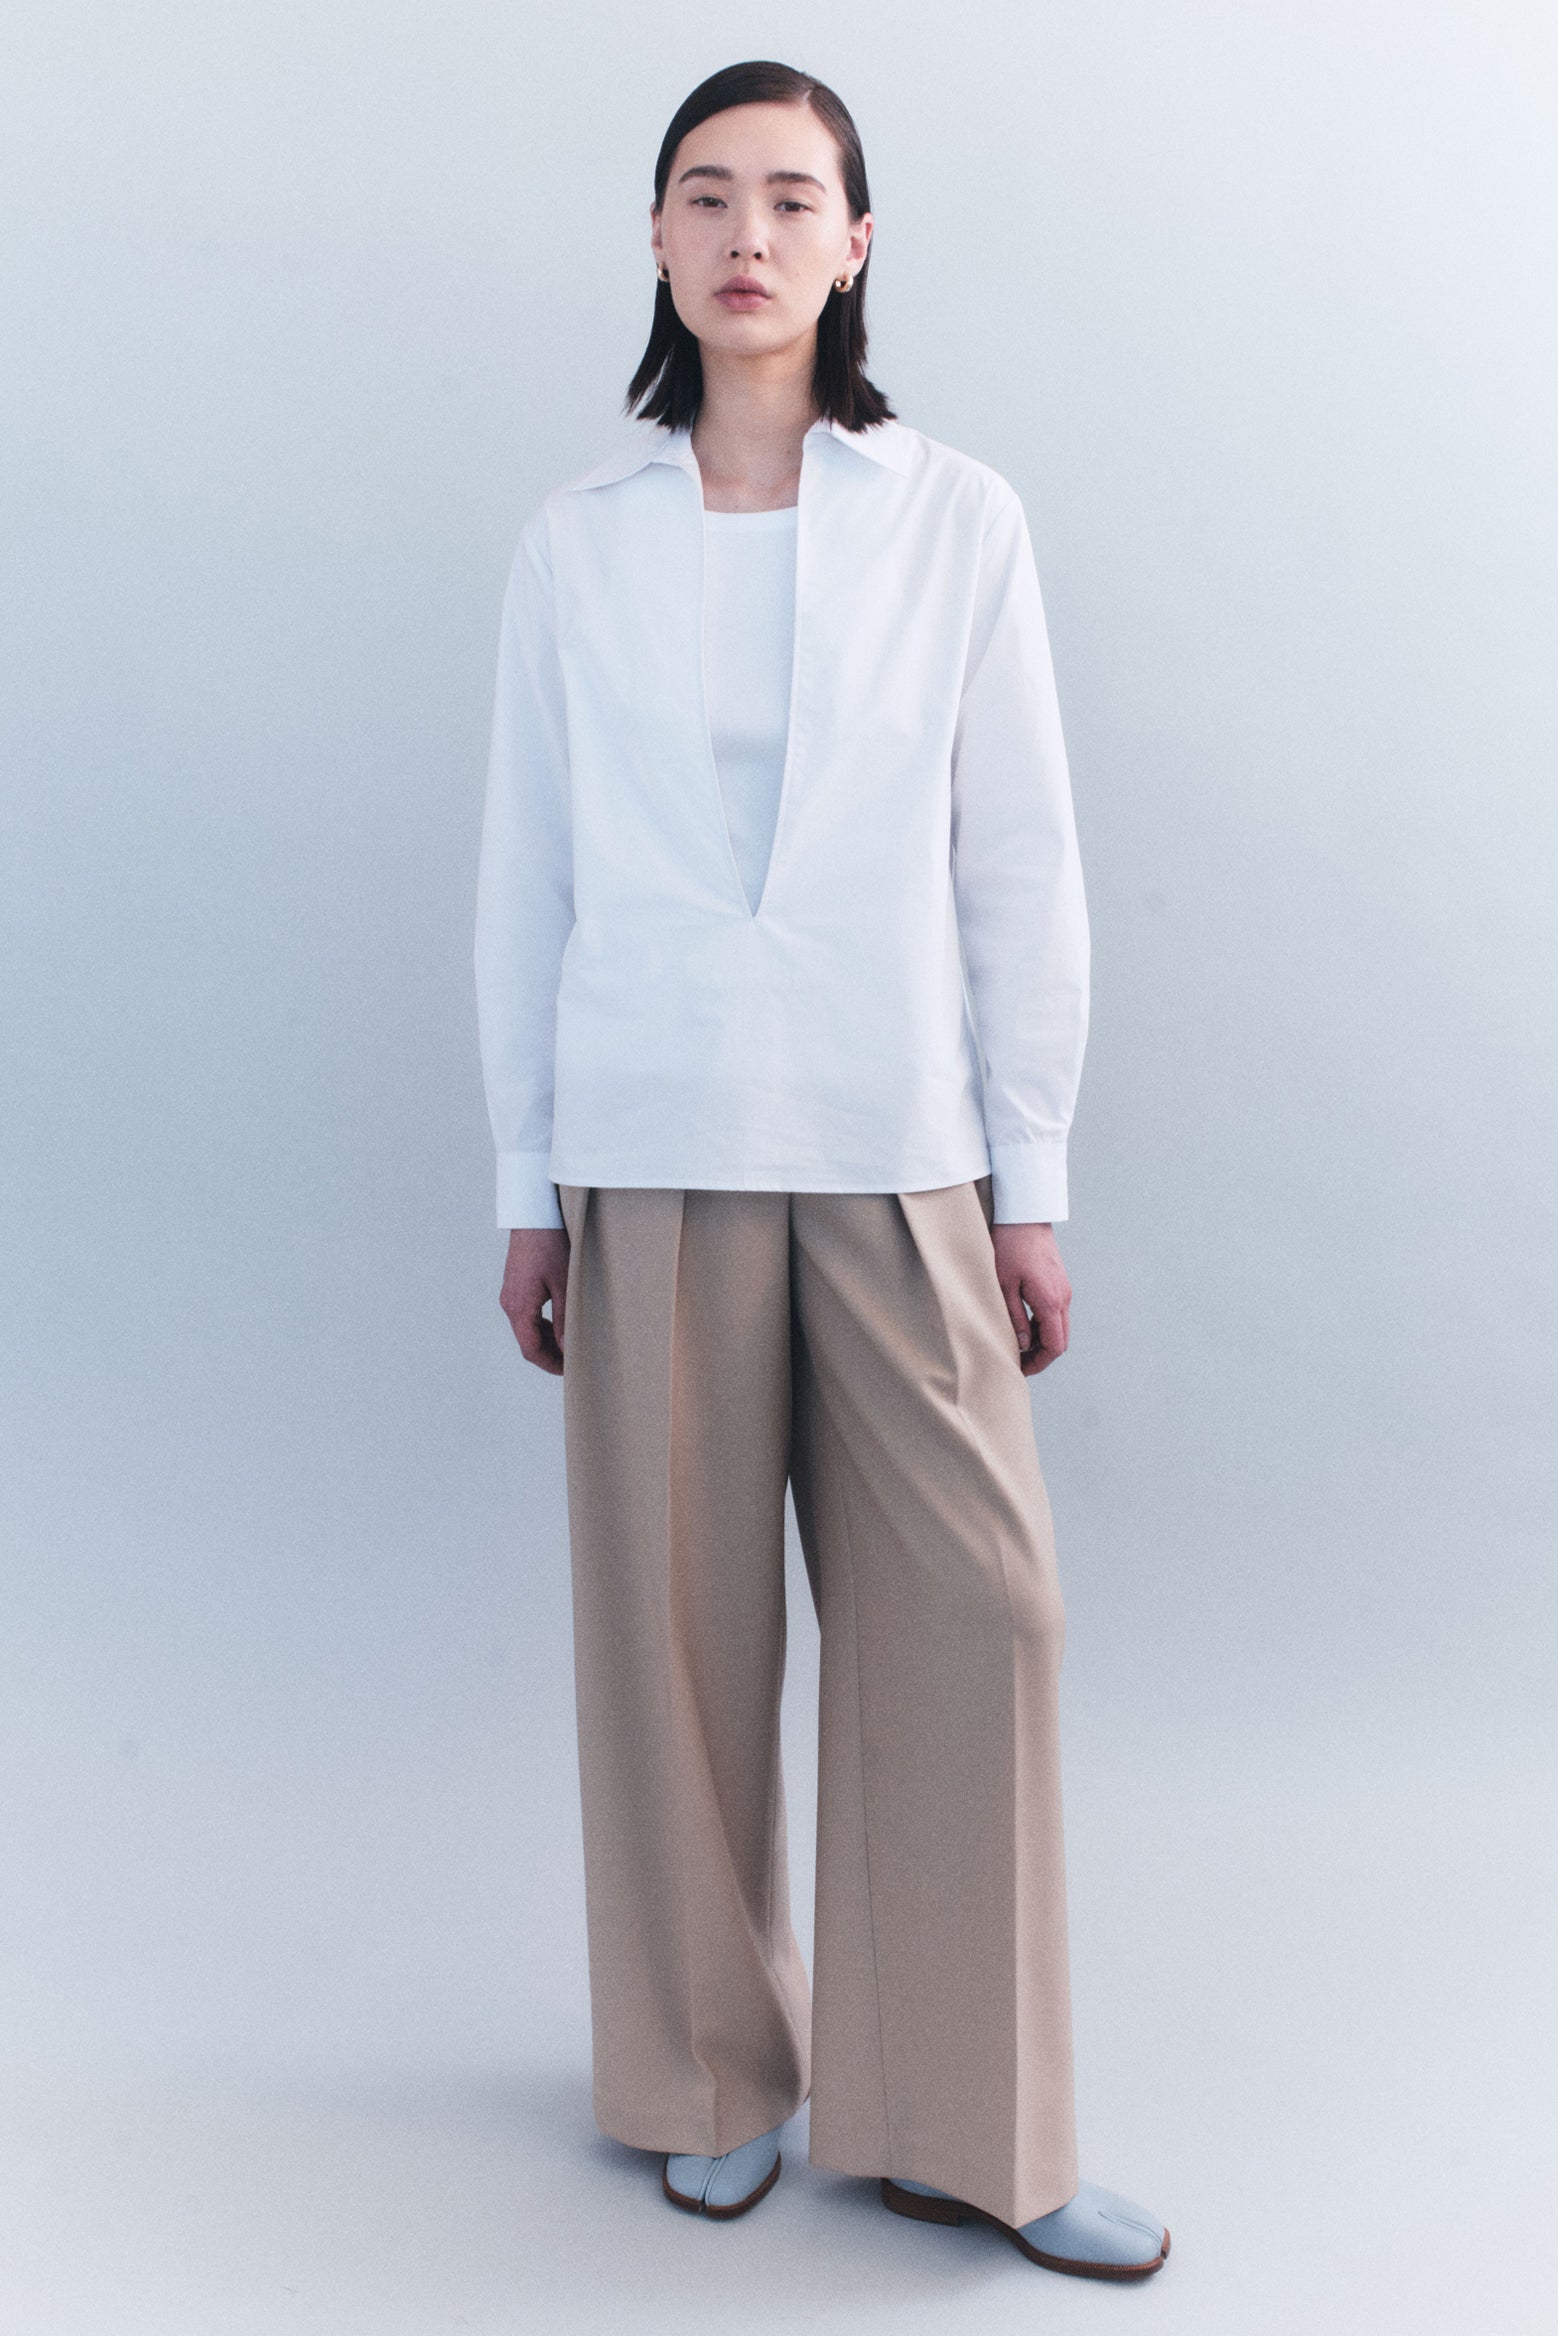 The Courtney Zheng Haines Poplin Front Slit Shirt in White available at The New Trend Australia